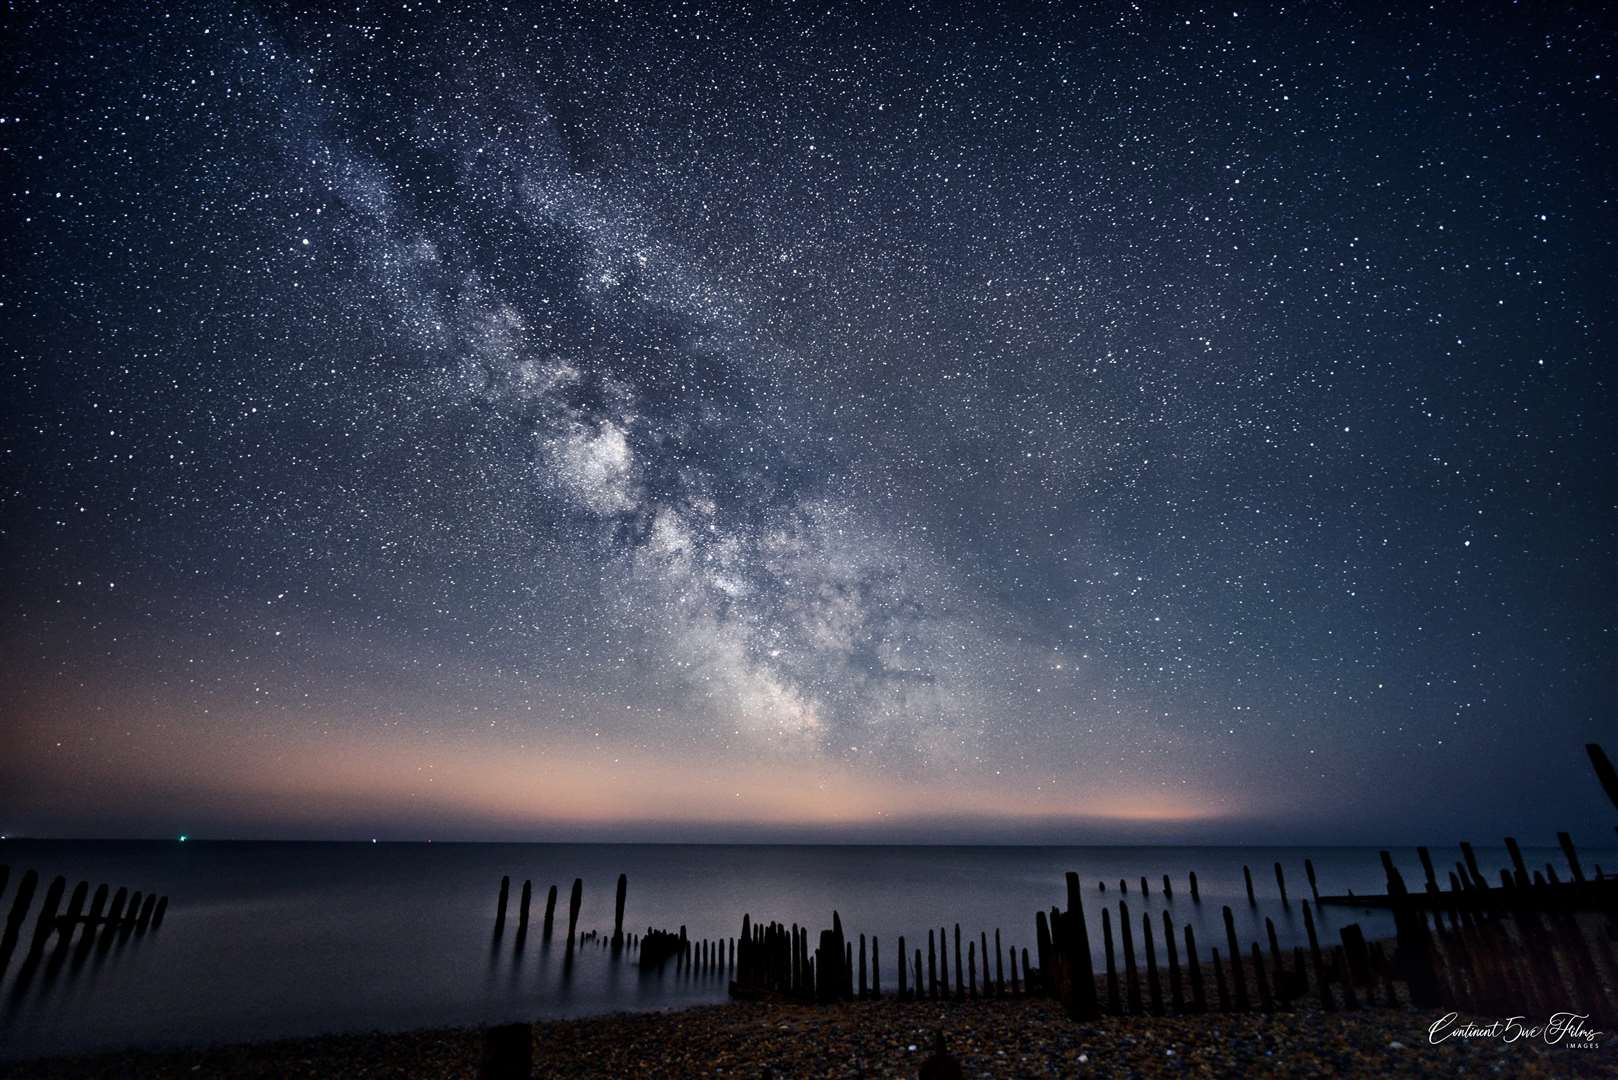 Travelling slightly further afield, Mr Hardy took this picture of the Milky Way at Winchelsea Beach. Picture: Mike Hardy